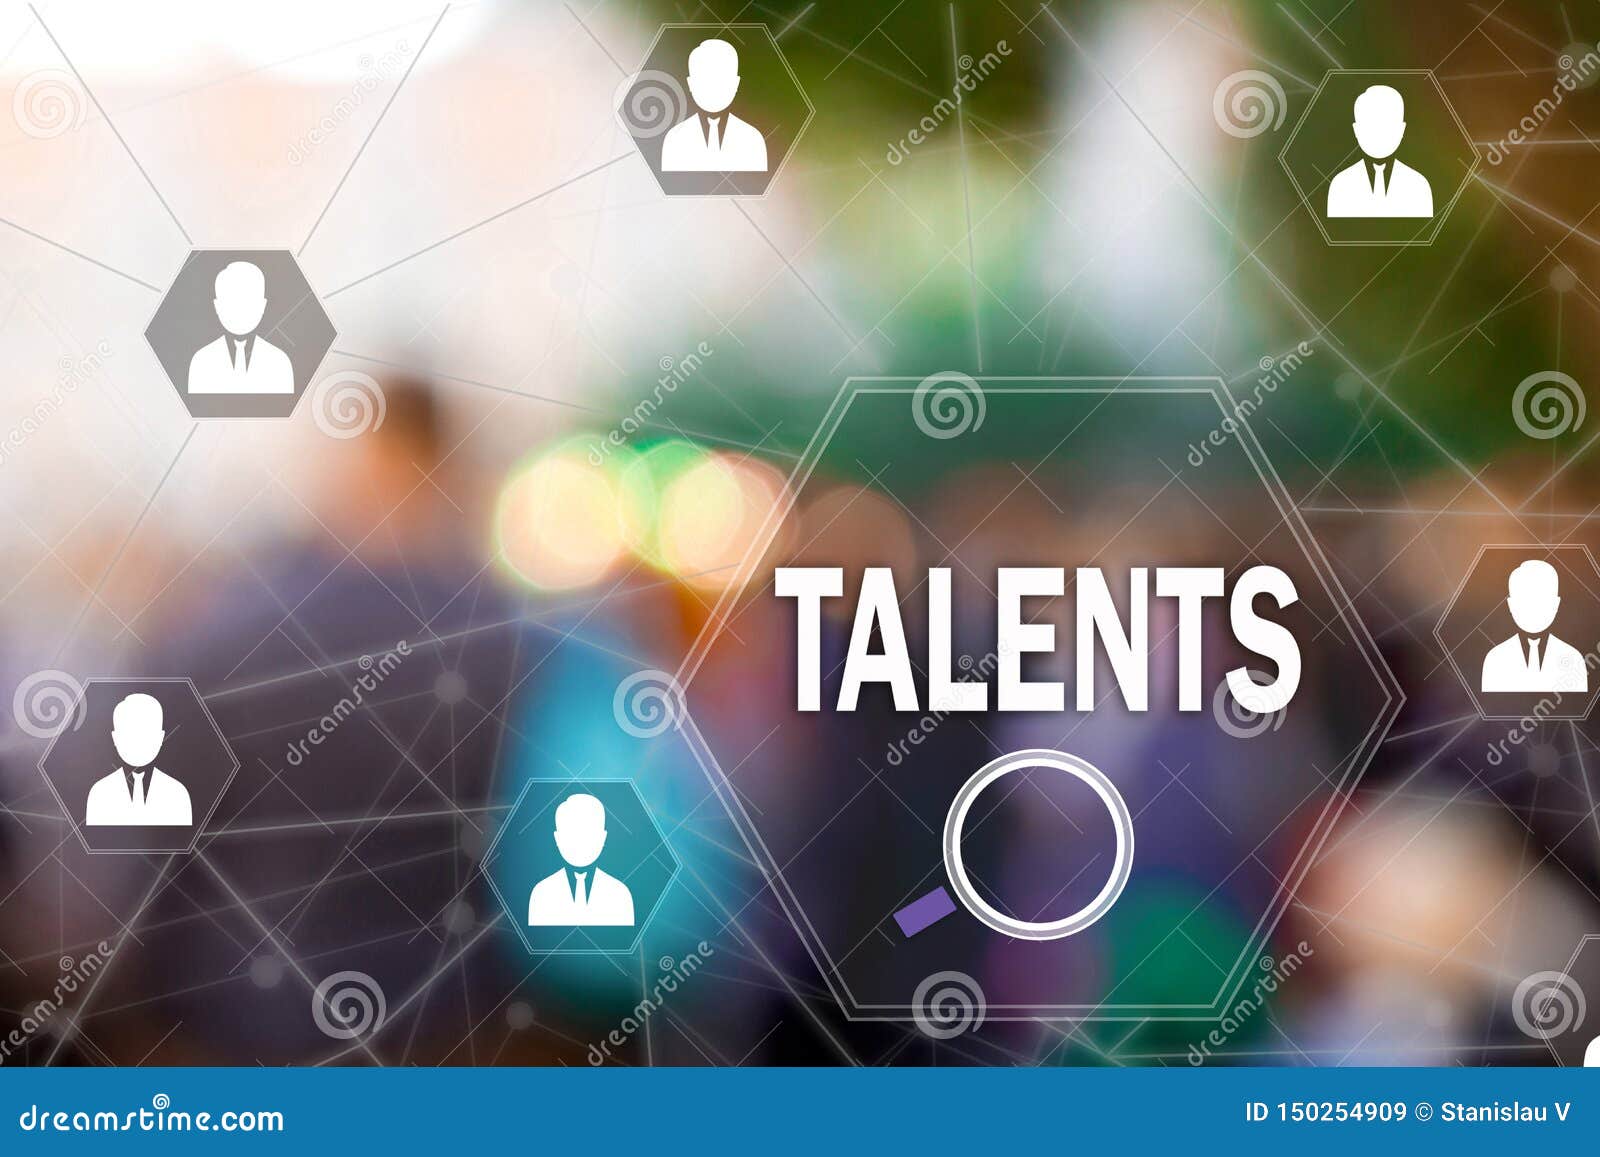 Search Talented Employees. Human Resources on Blur Background.Concept ...